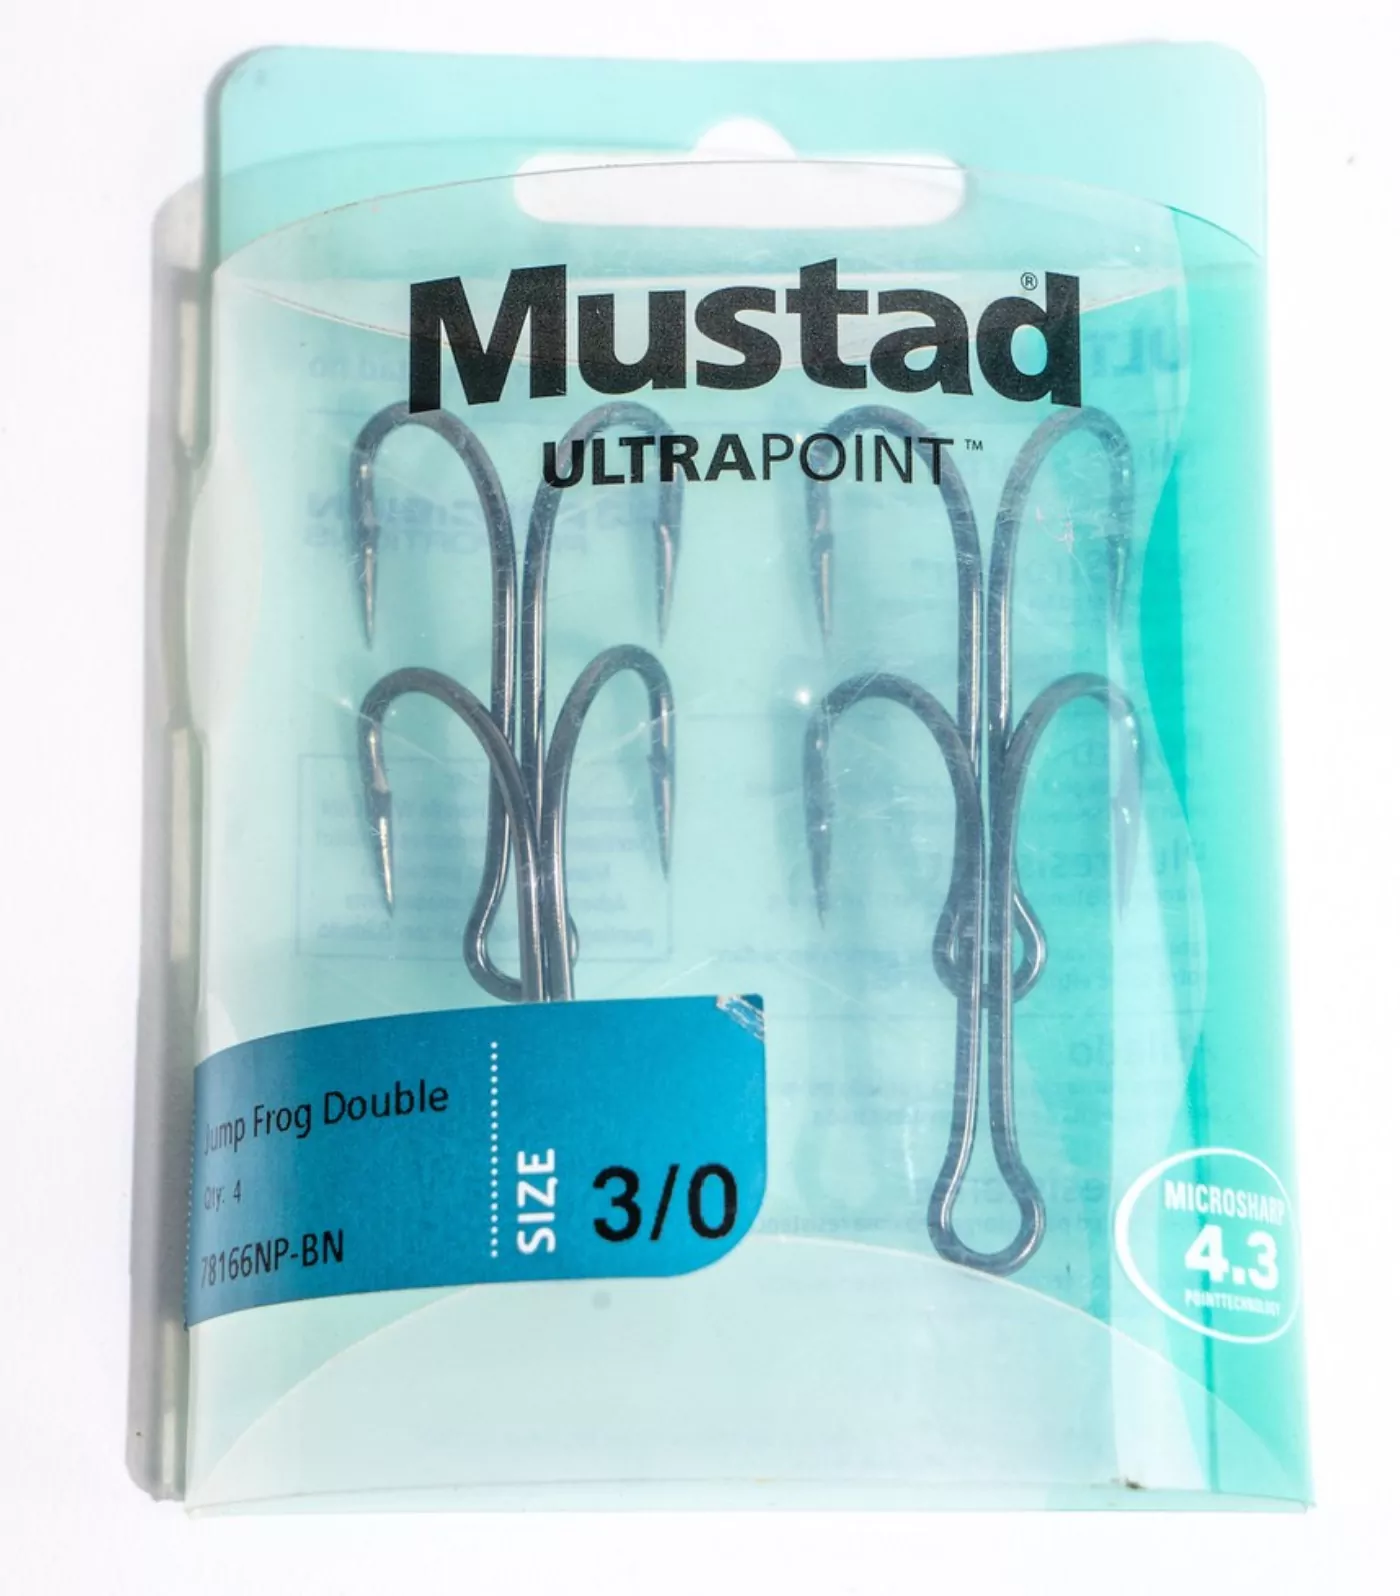 MUSTAD 78166 NP BN Double Hook for Soft Frogs - Replacement Hooks